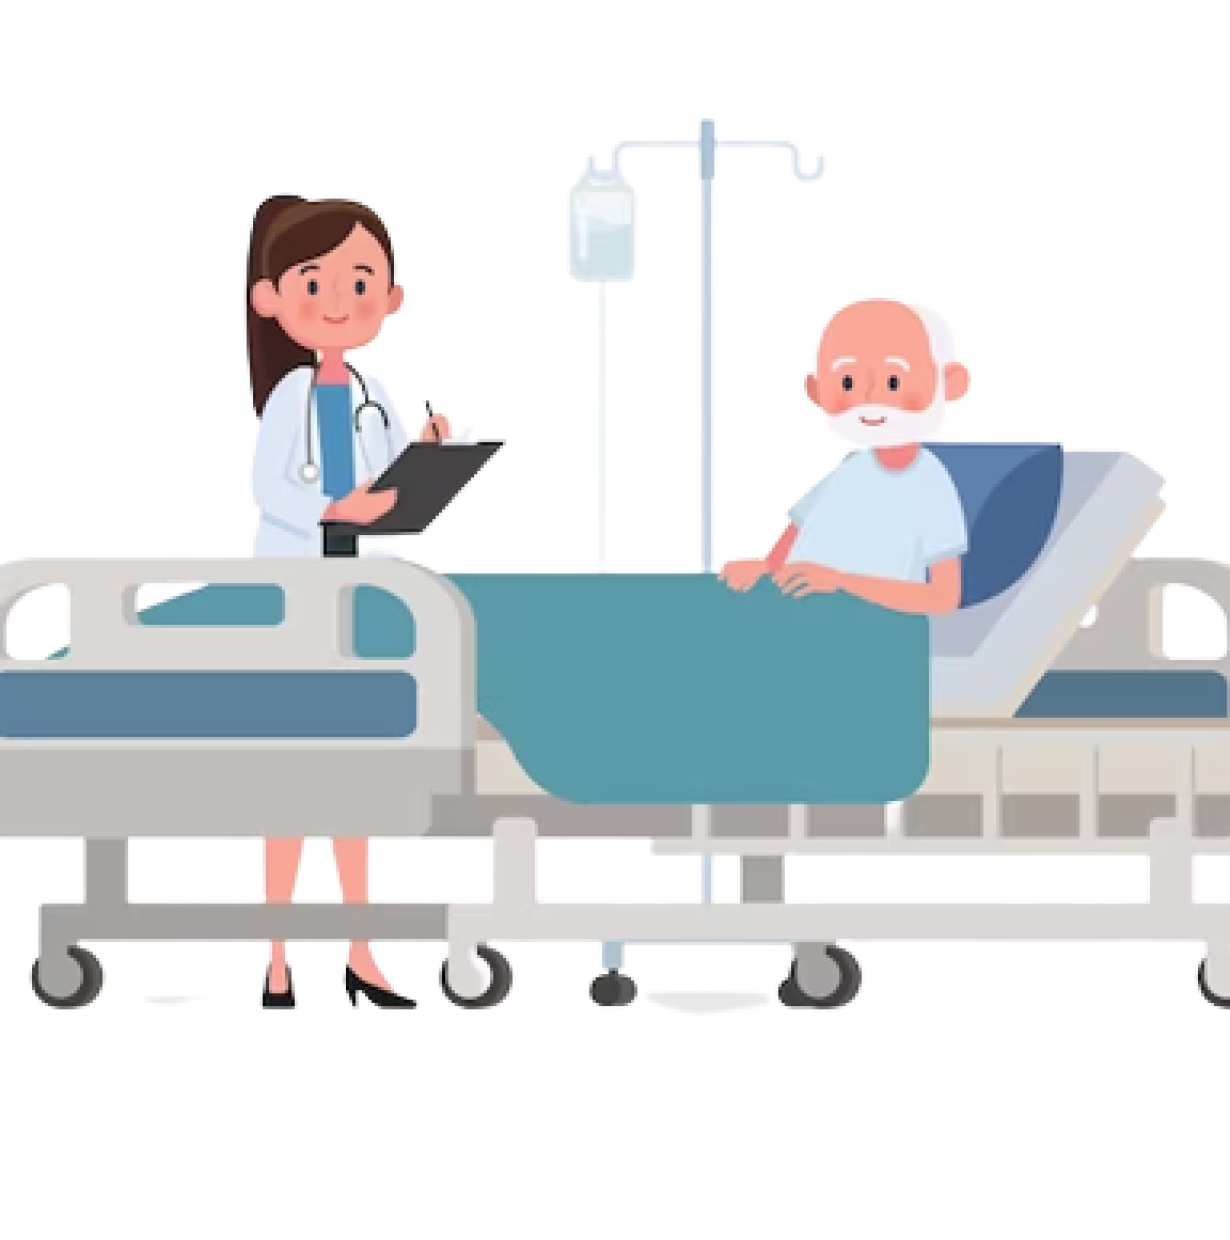 doctor-s-visit-ward-patient-sick-person-is-medical-bed-drip-vector-illustration-flat-style_180264-17-removebg-preview